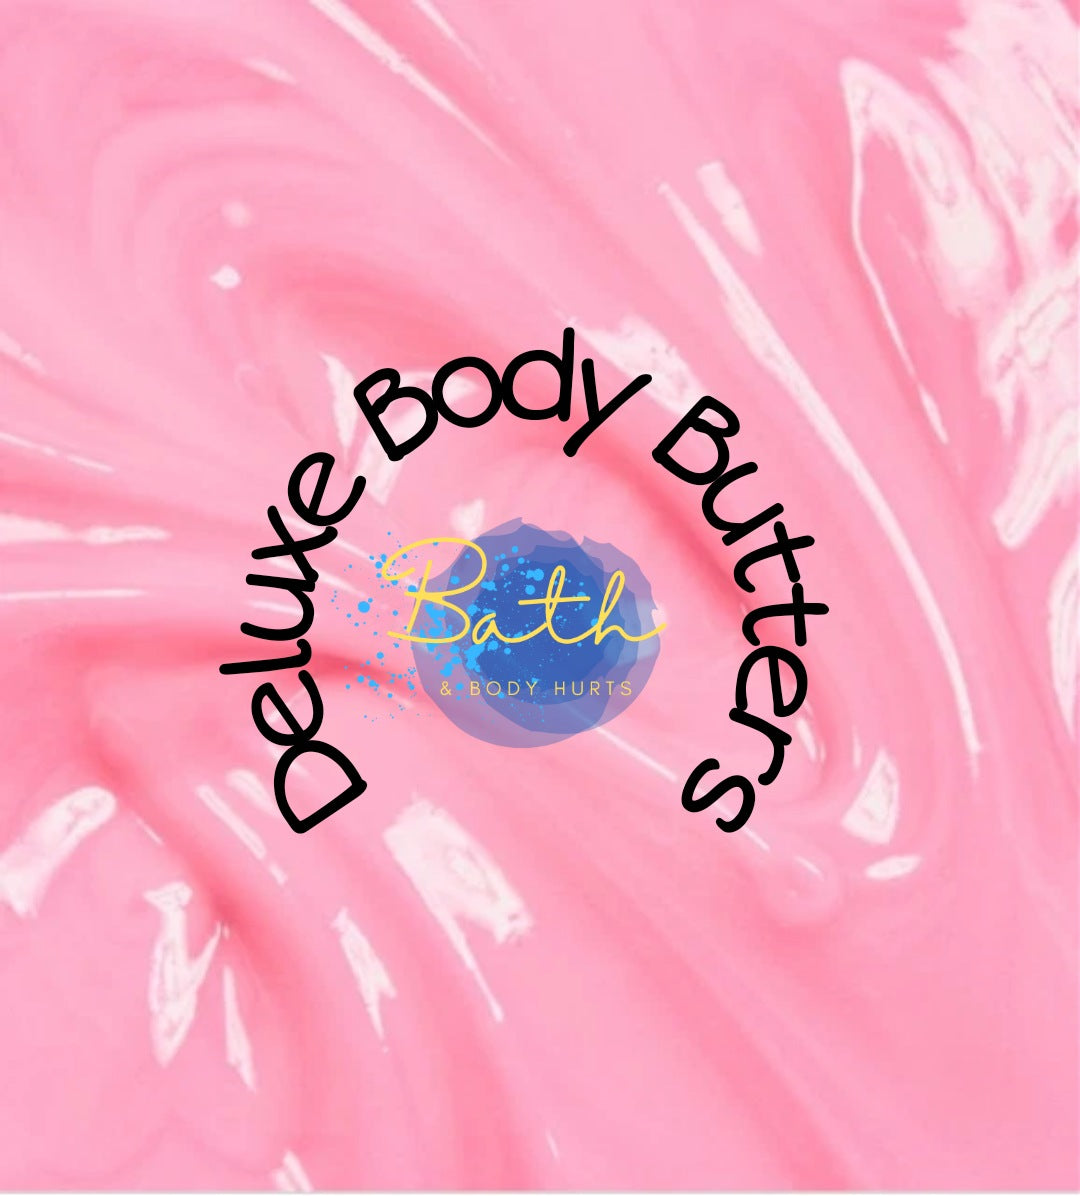 Deluxe Body Butters